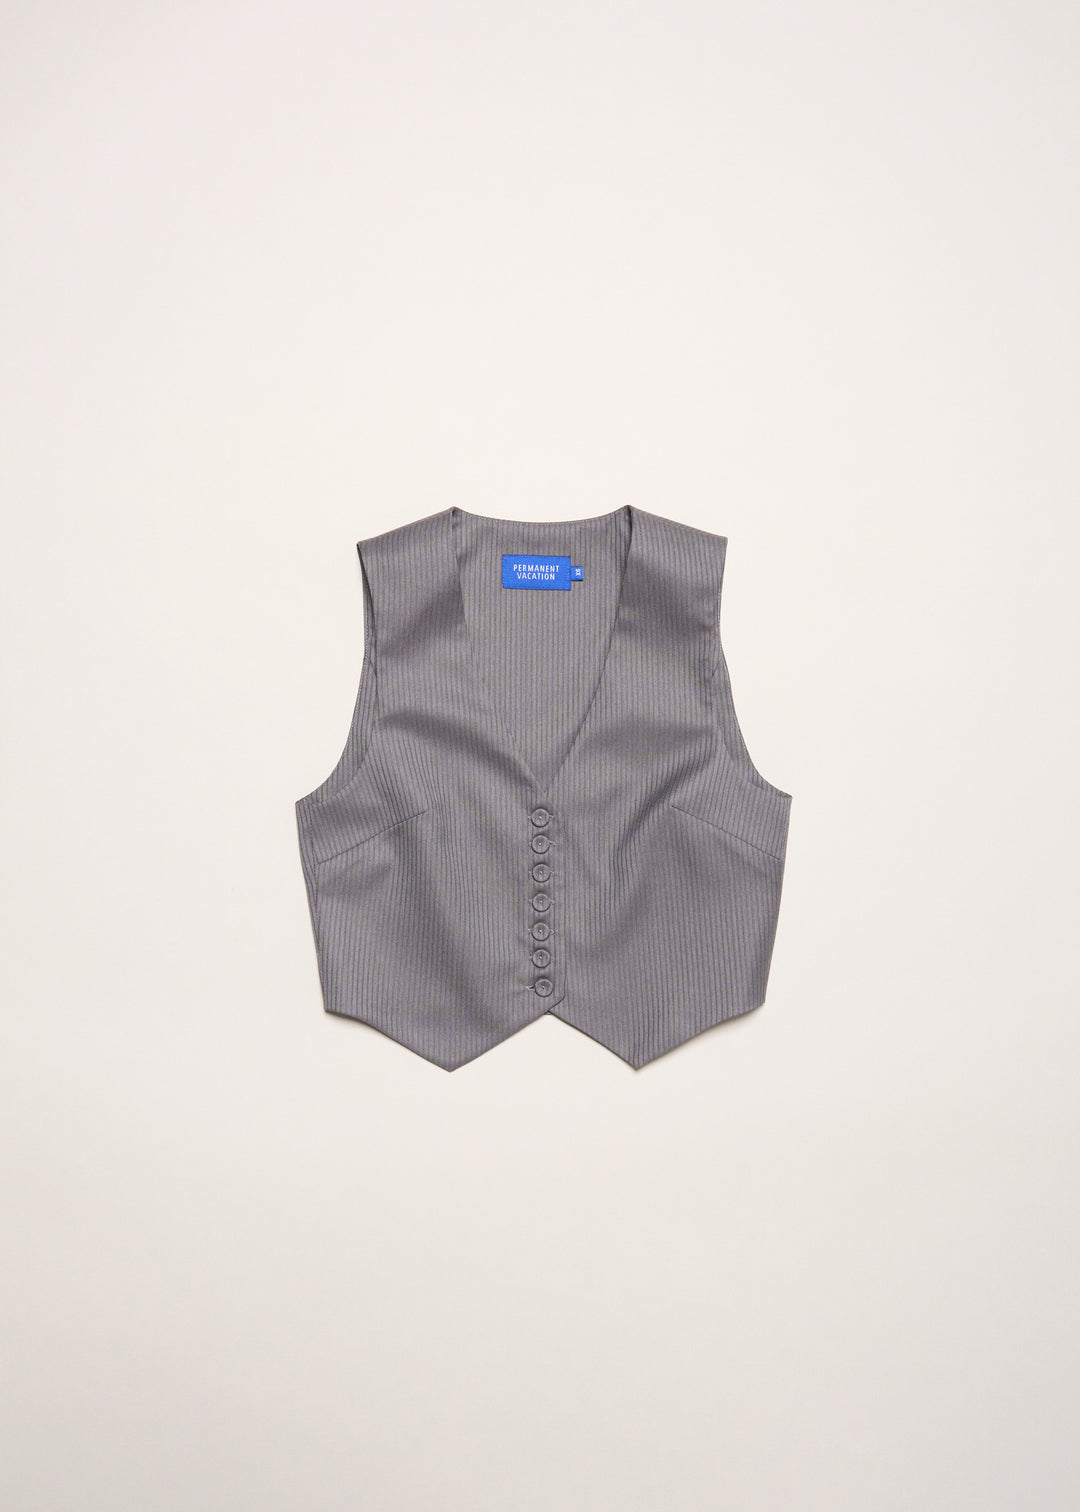 Permanent Vacation - All Day Vest - Grey Pinstripe